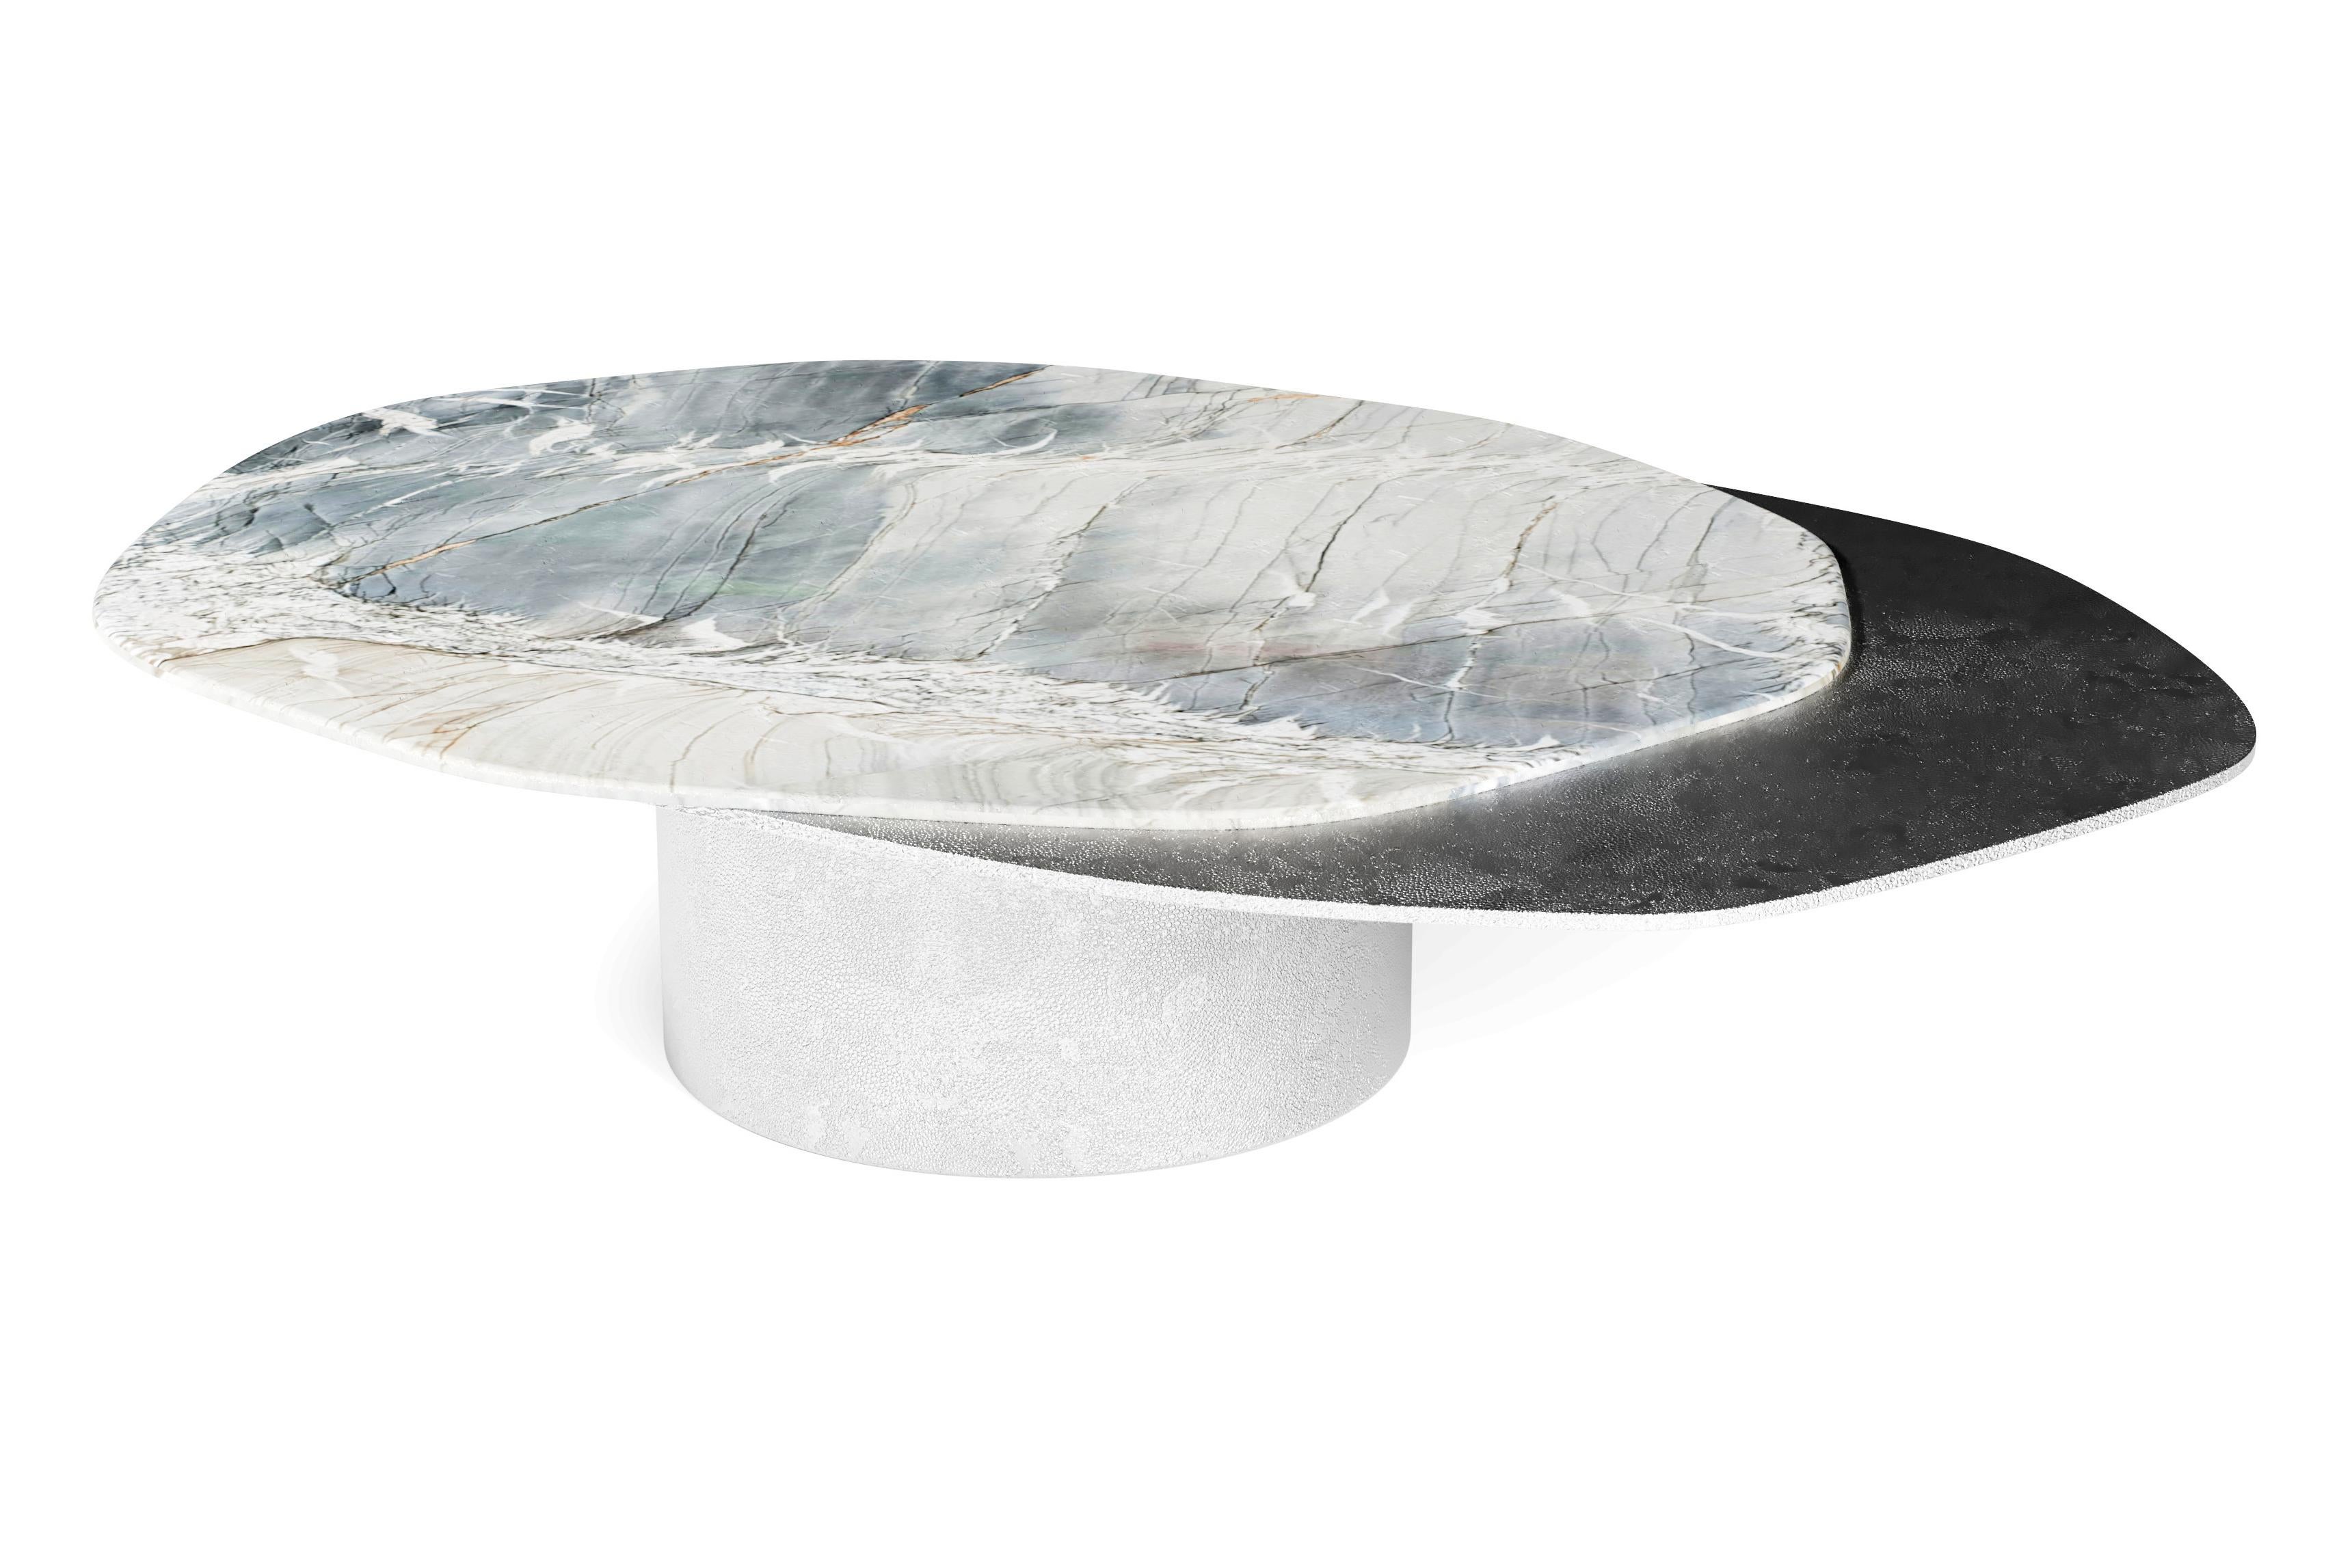 “The Epicure III” Contemporary Center Coffee Table ft natural quartzite Venom and solid aluminium plates in “Windy Nickel” finish.

Luxury doesn’t always follow the common patterns. Luxury goes beyond and almost like one of the best gourmets joins